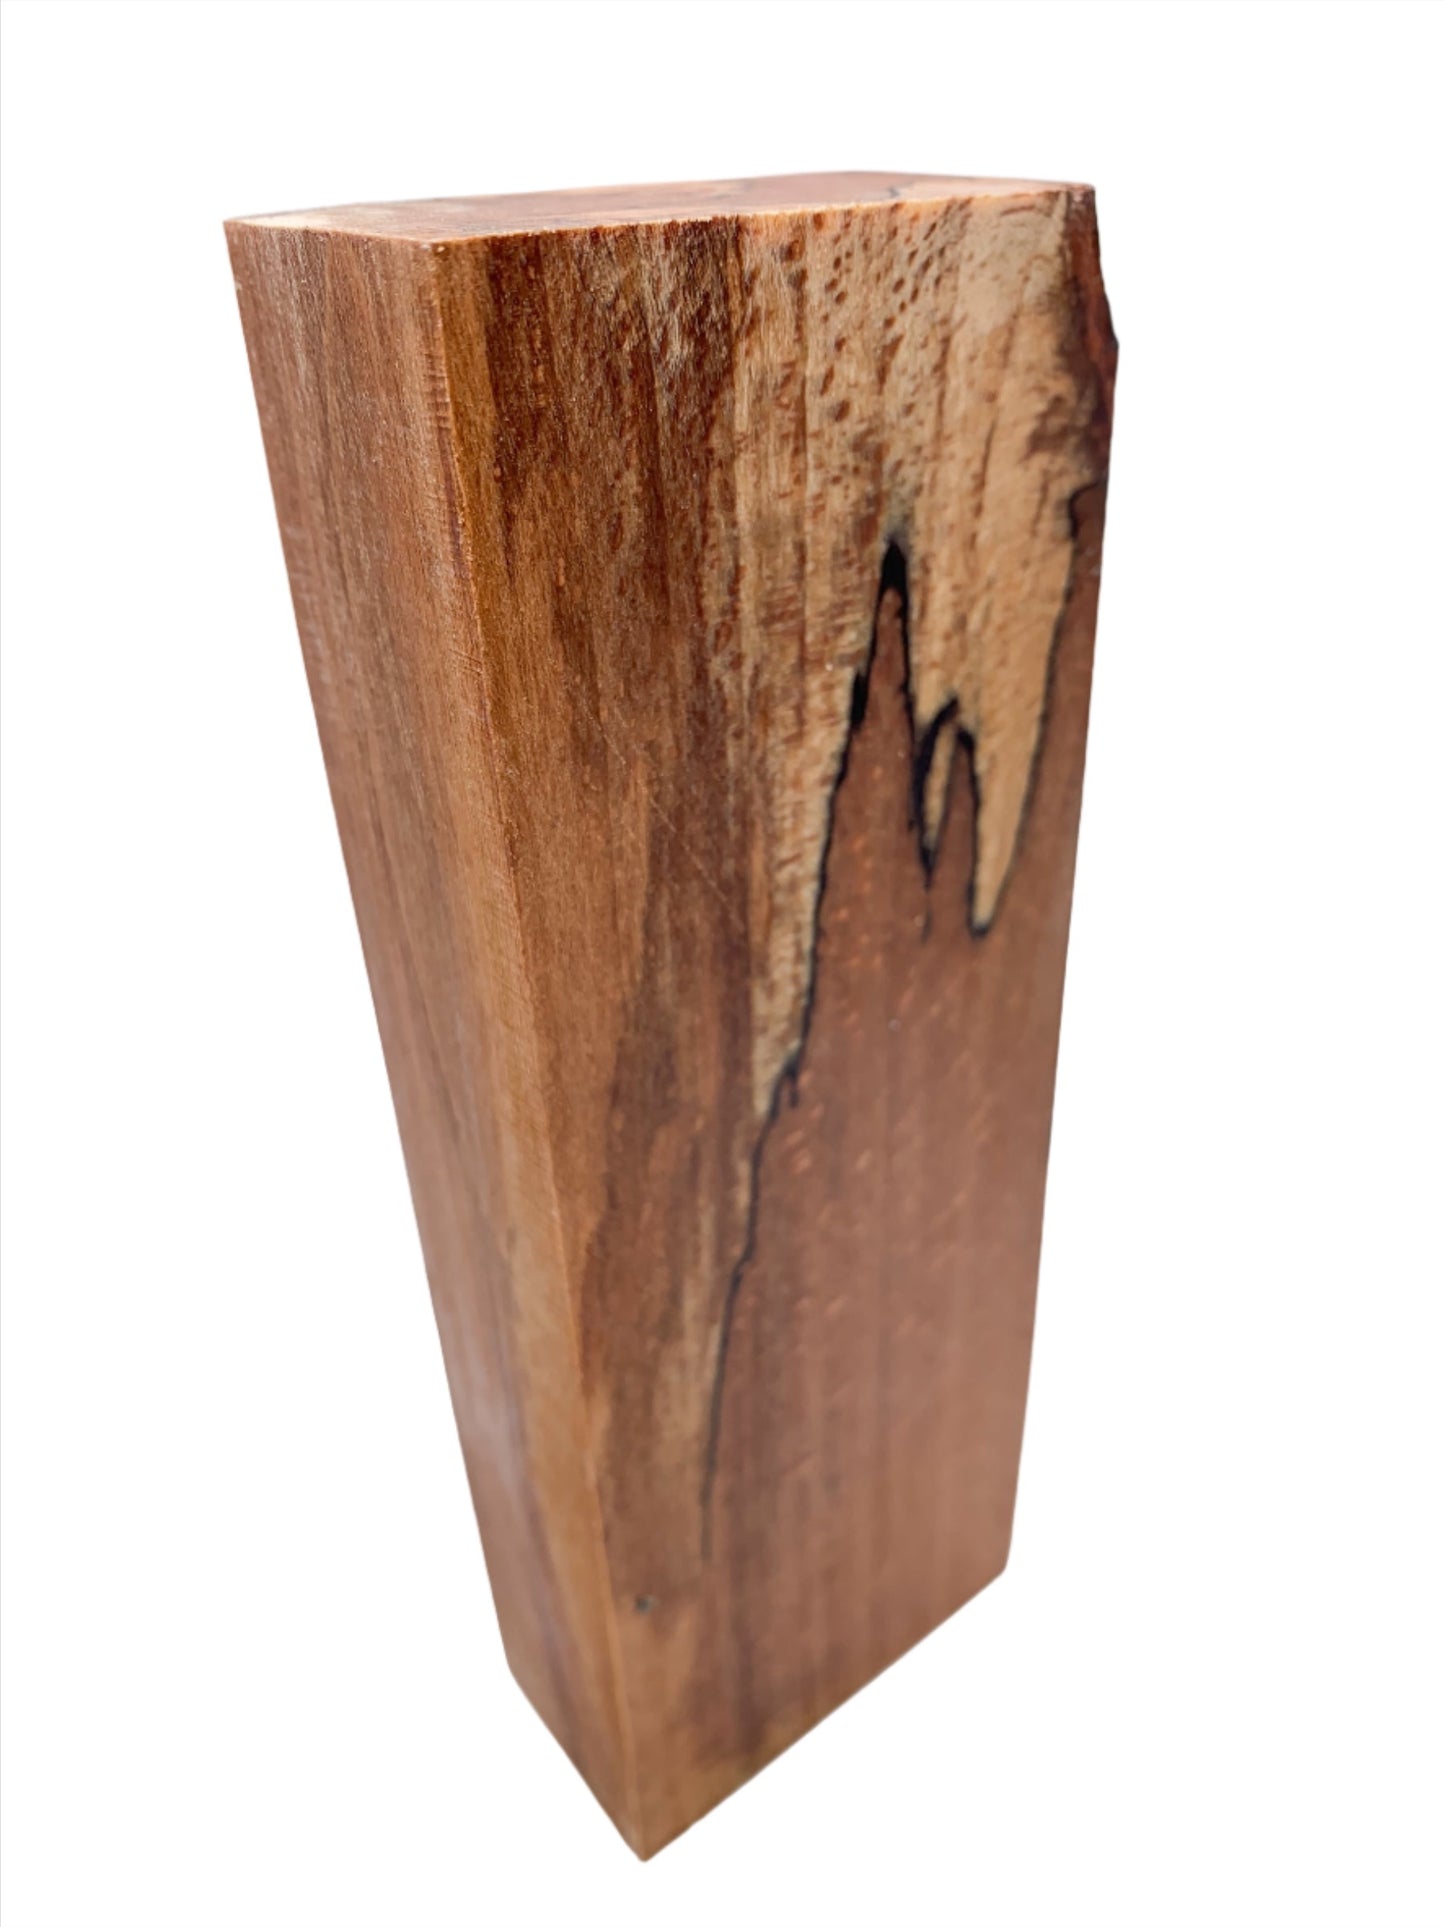 Spalted Beech Wood Knife Scale / Craft Blank | Fully Stabilised | 158x60x30 | Wooden Knife Handle